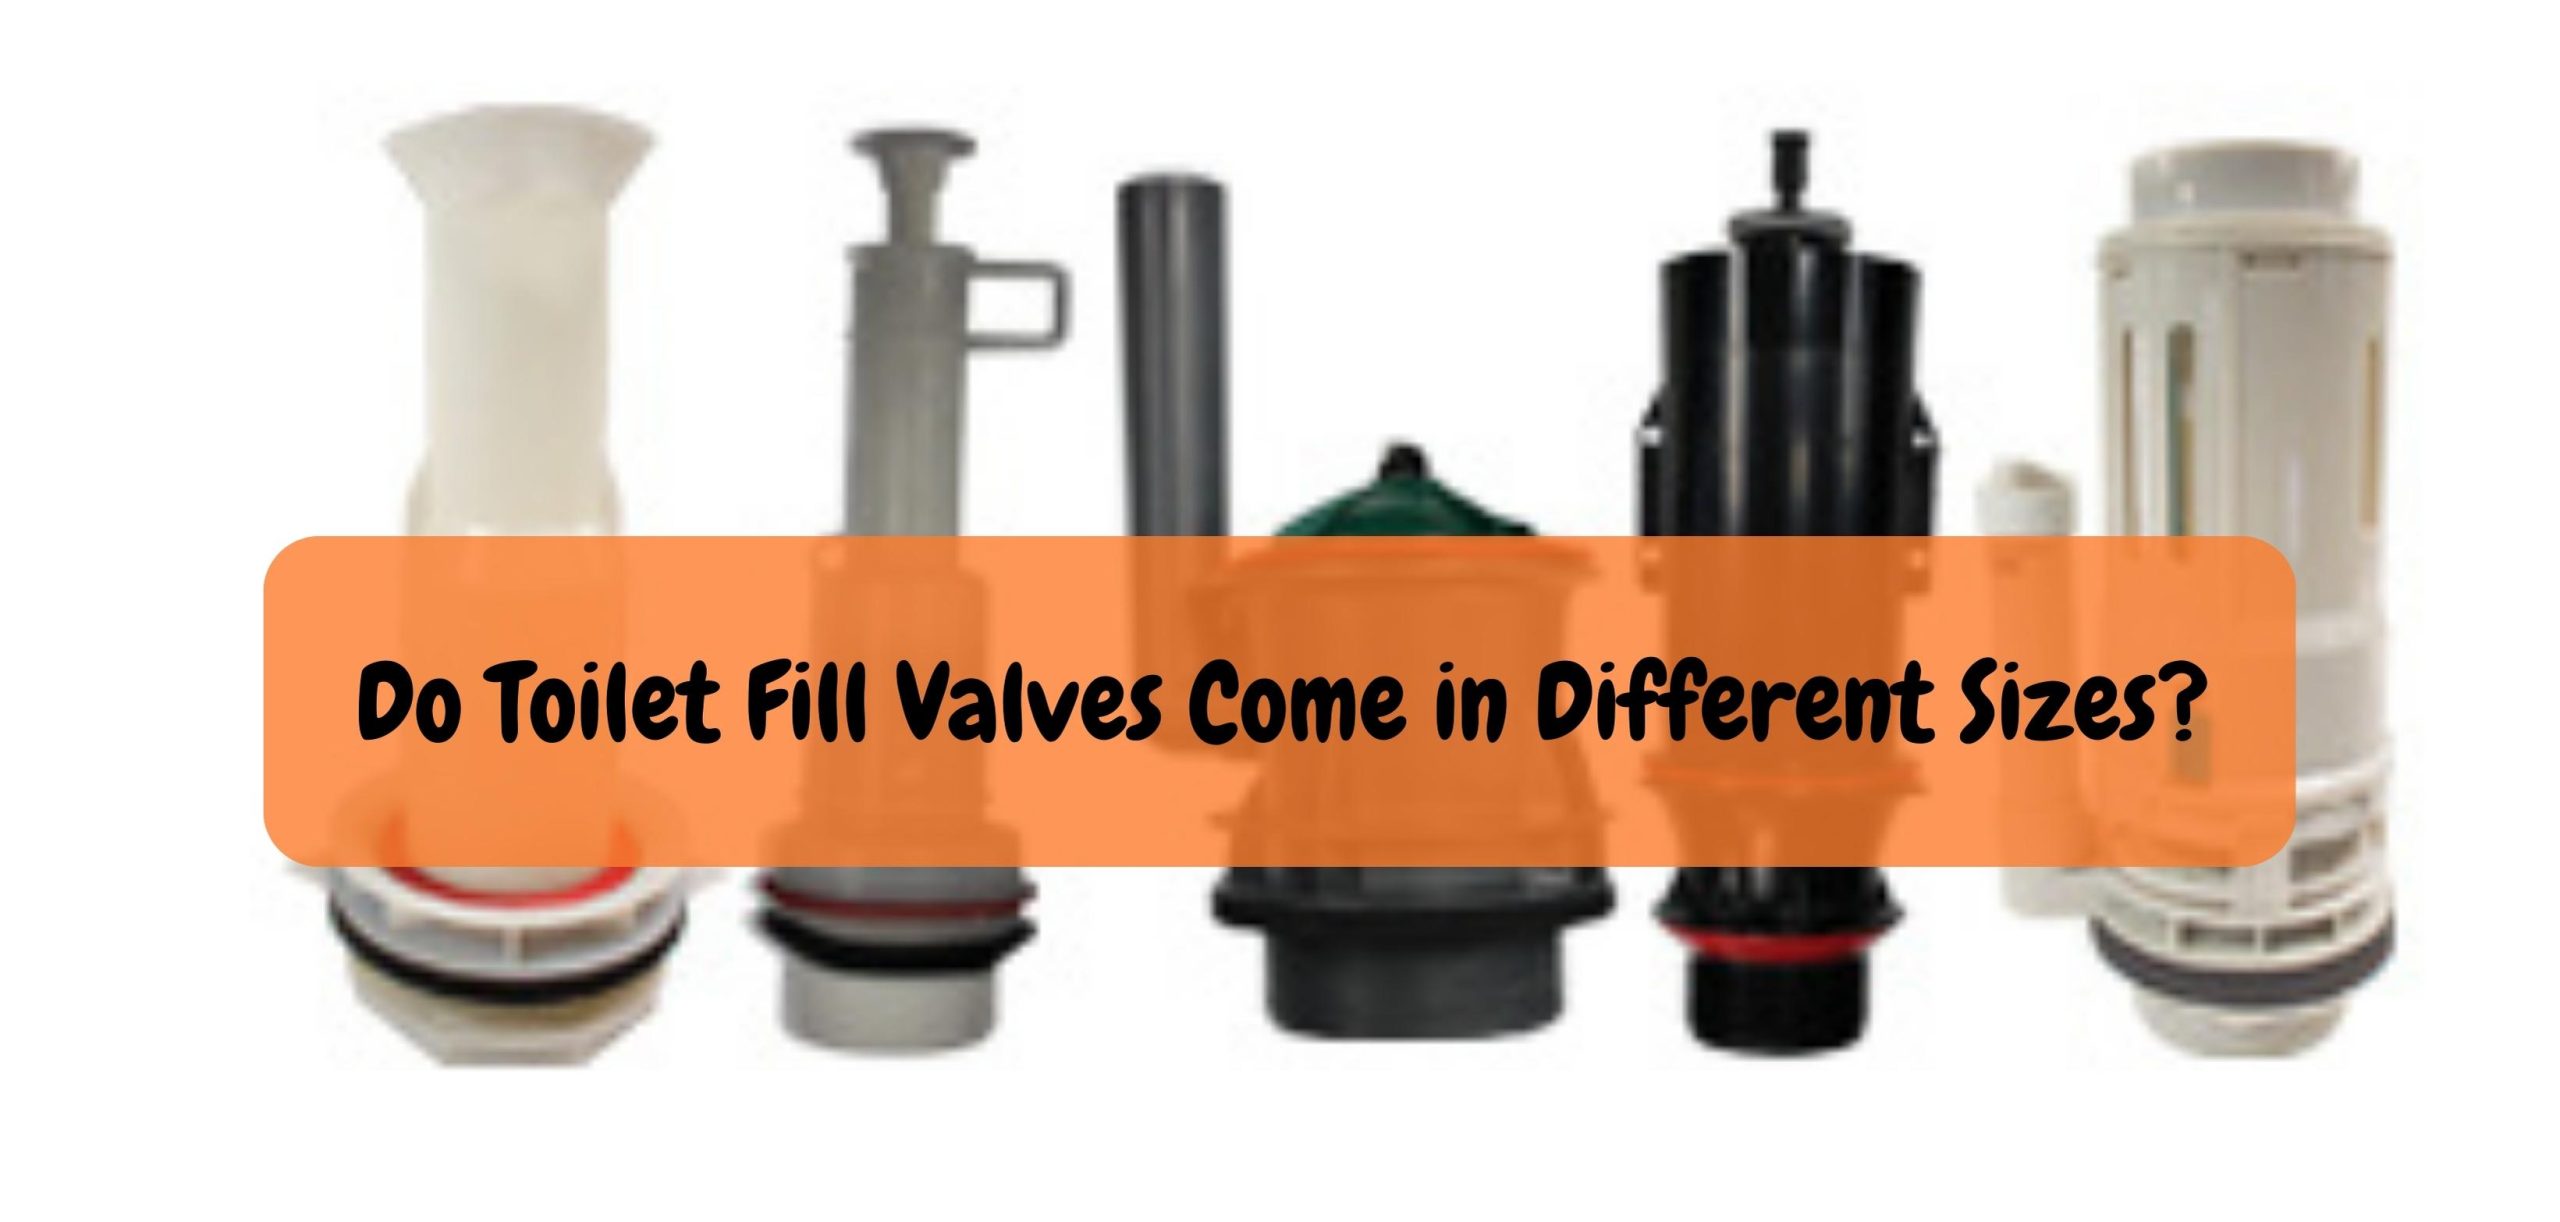 Do Toilet Fill Valves Come in Different Sizes